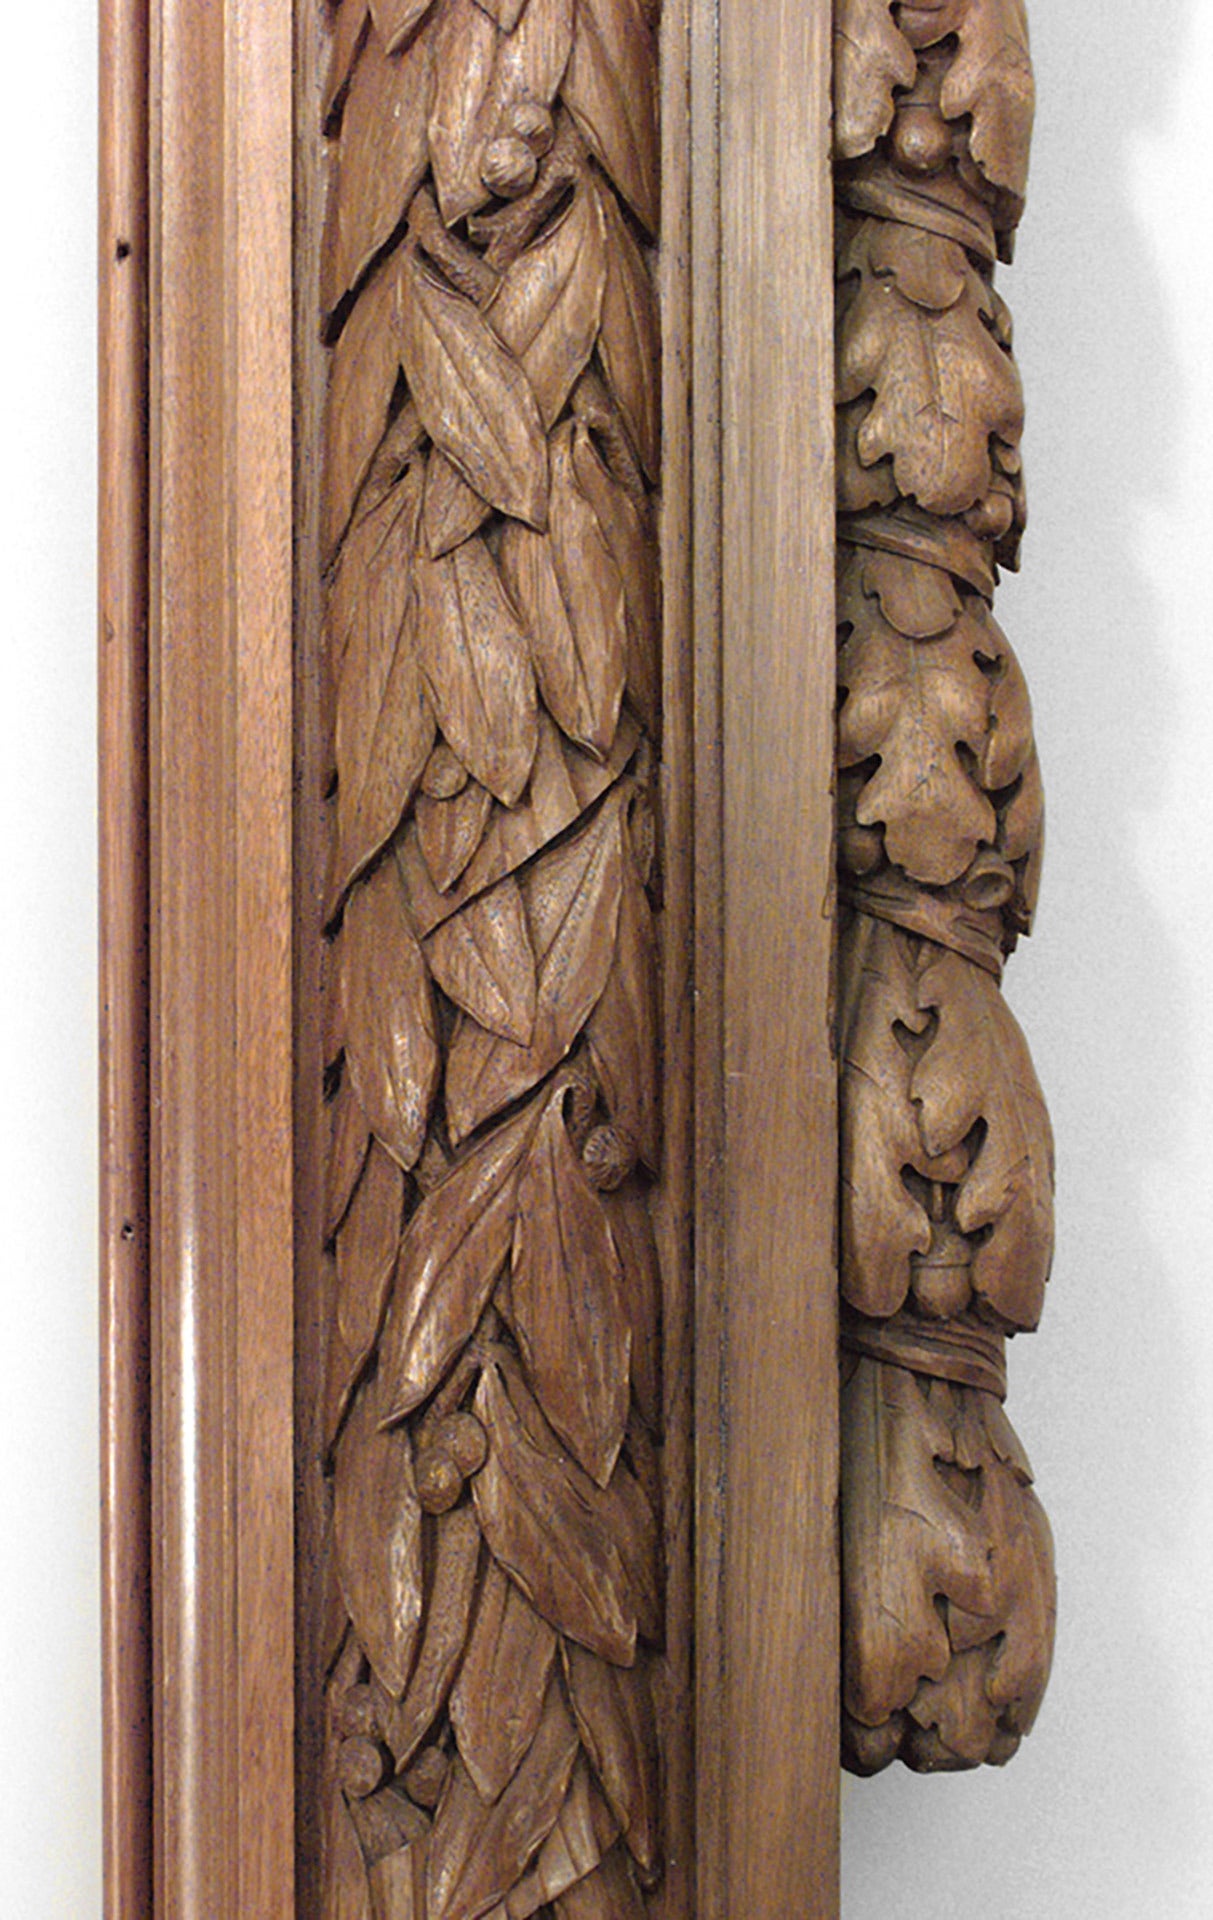 Three (3) 19th century English Georgian style mahogany carved archways with oak and laurel leaf designs, from the Belmont Estate, Long Island.